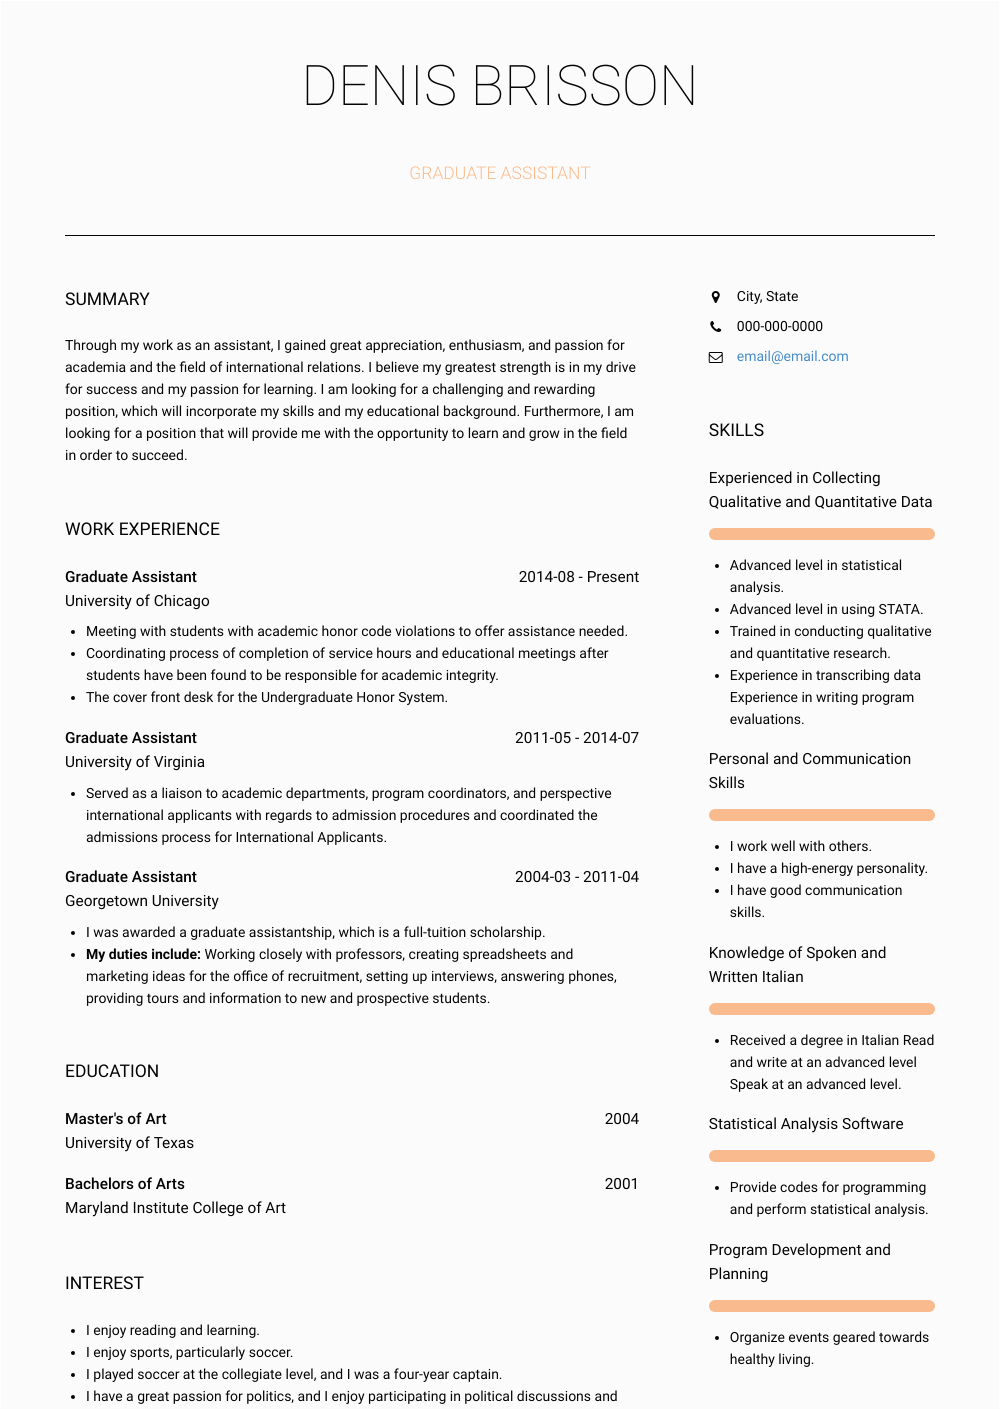 Sample Resume for Graduate assistant Position Graduate assistant Resume Samples and Templates